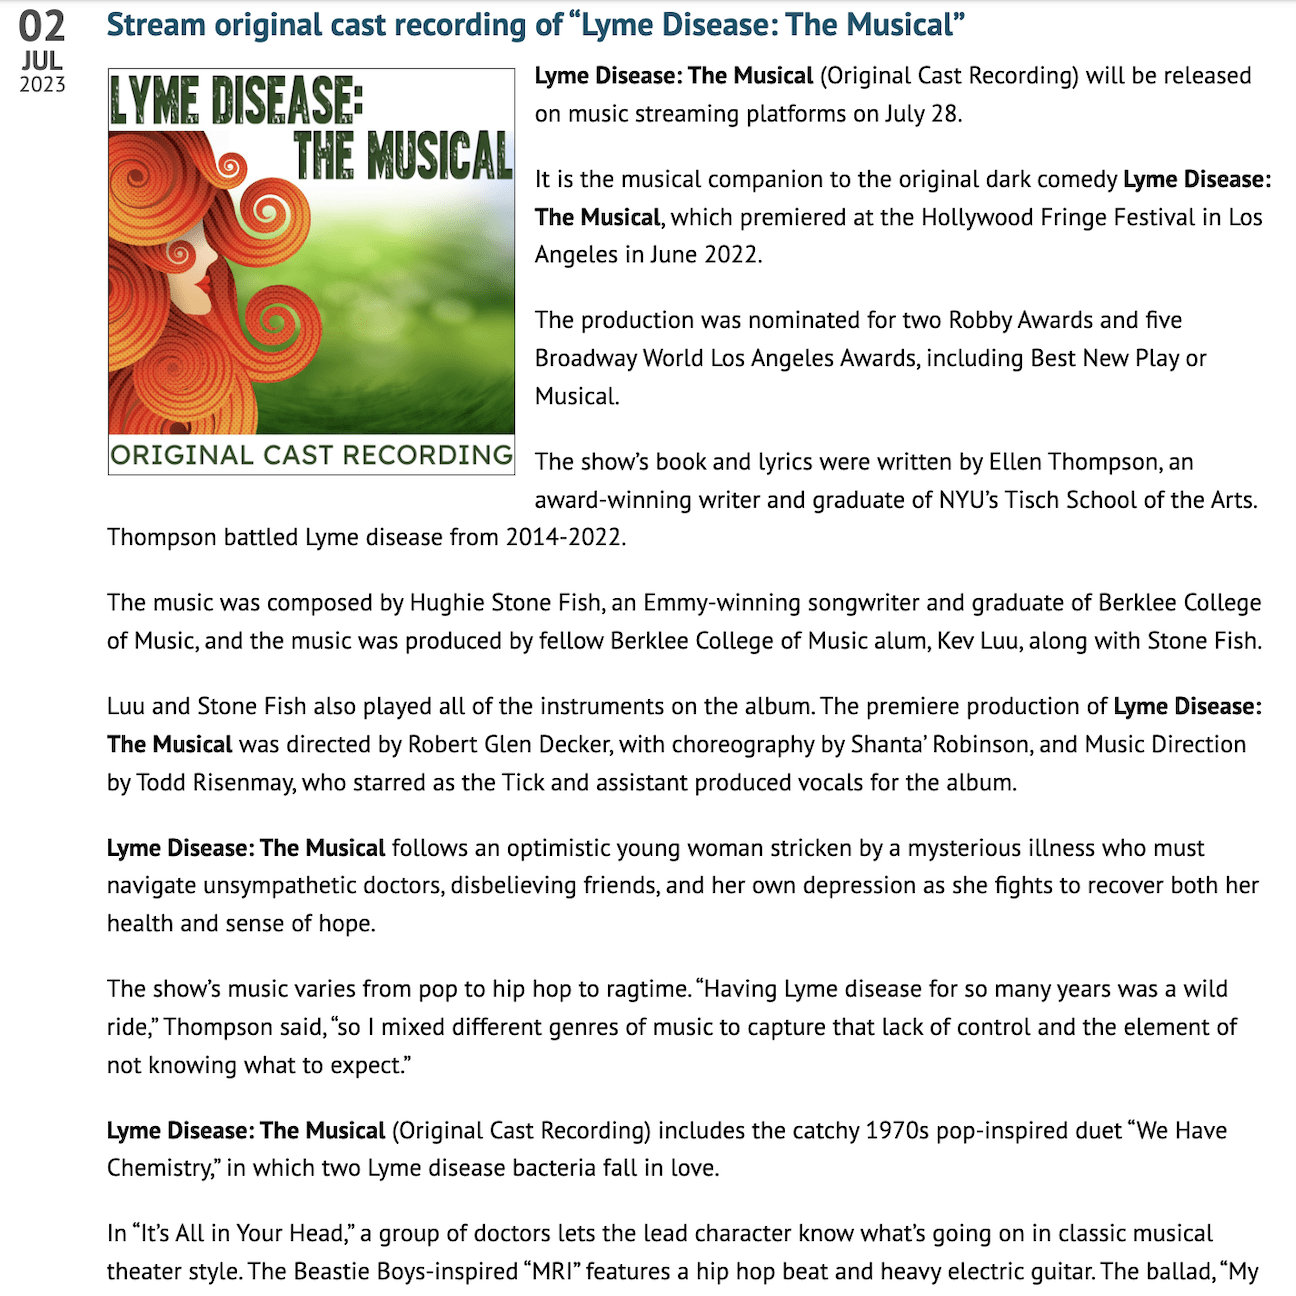 Our friends at Lymedisease.org announced our cast album's July 28, 2023 release date!